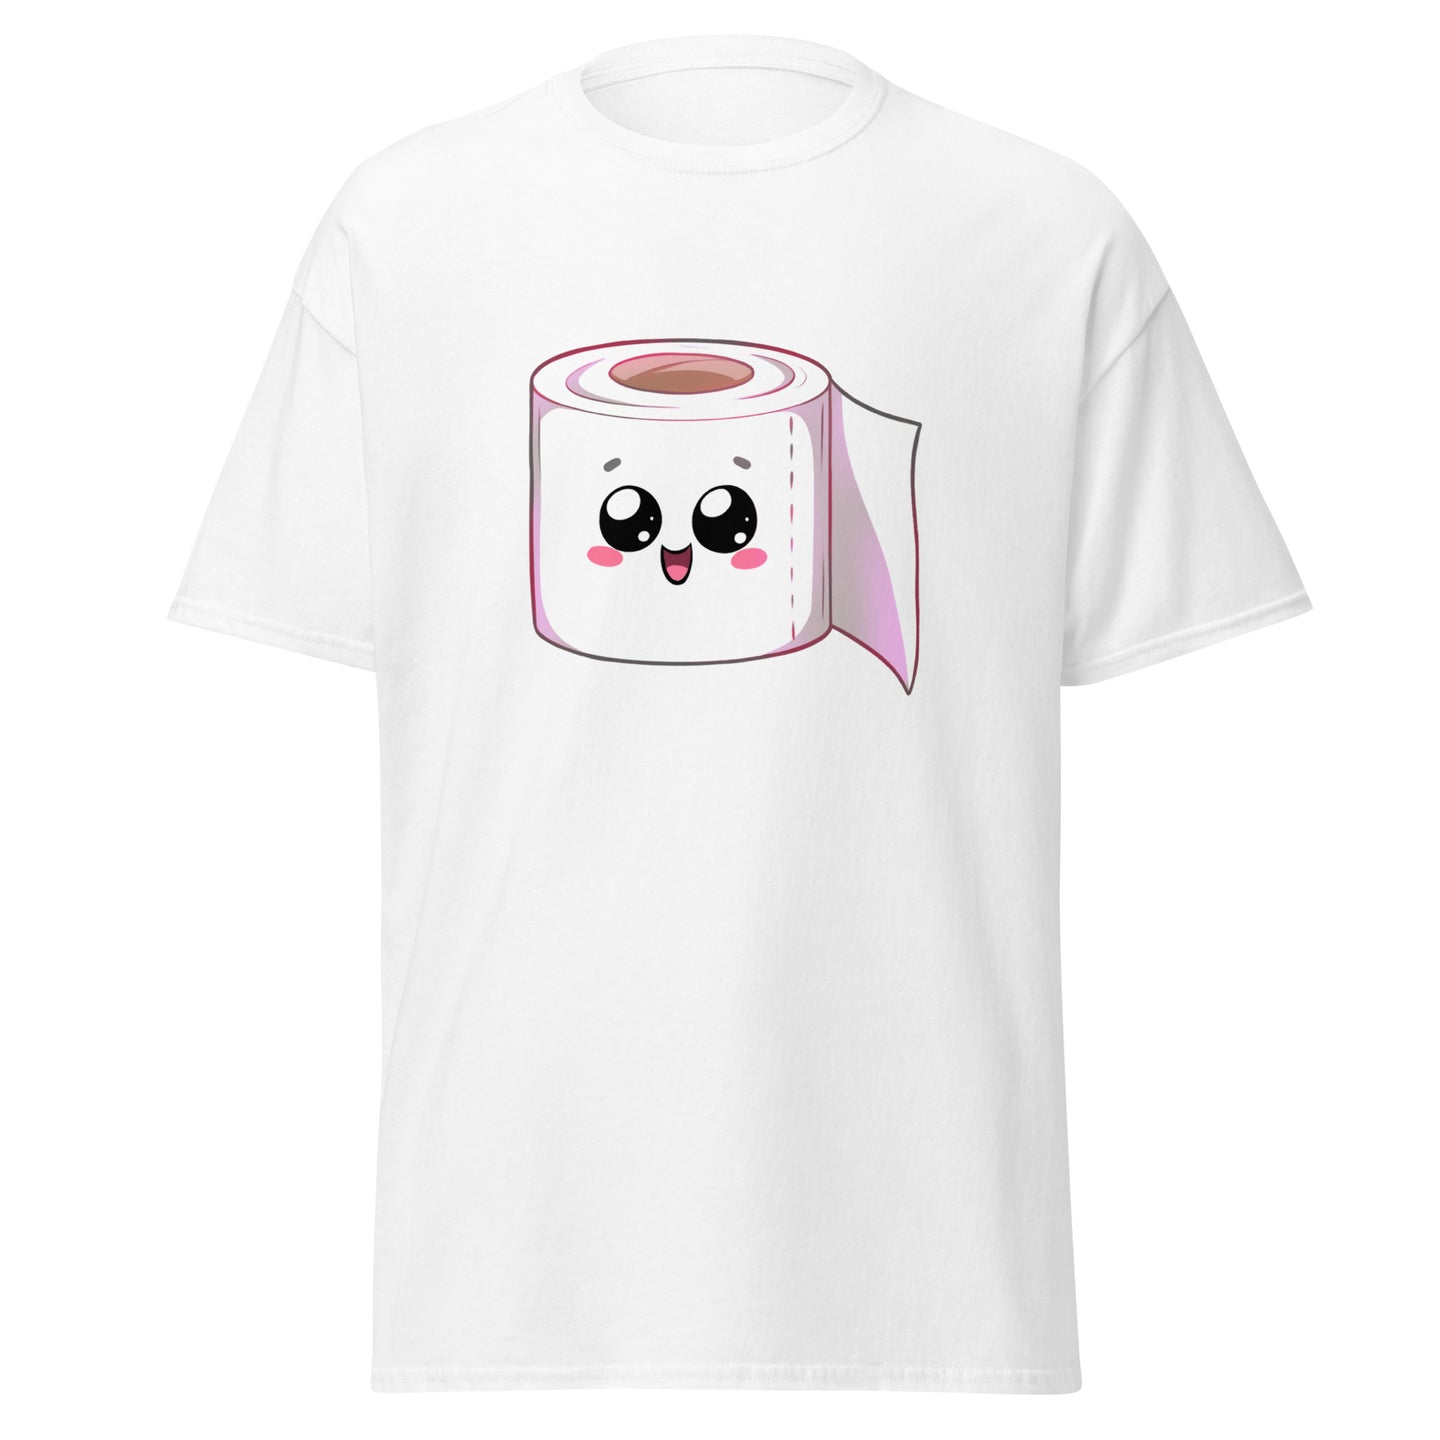 Hilarious Toilet Paper Graphic Tee - A Must-Have White T-Shirt for Gamers & Streamers